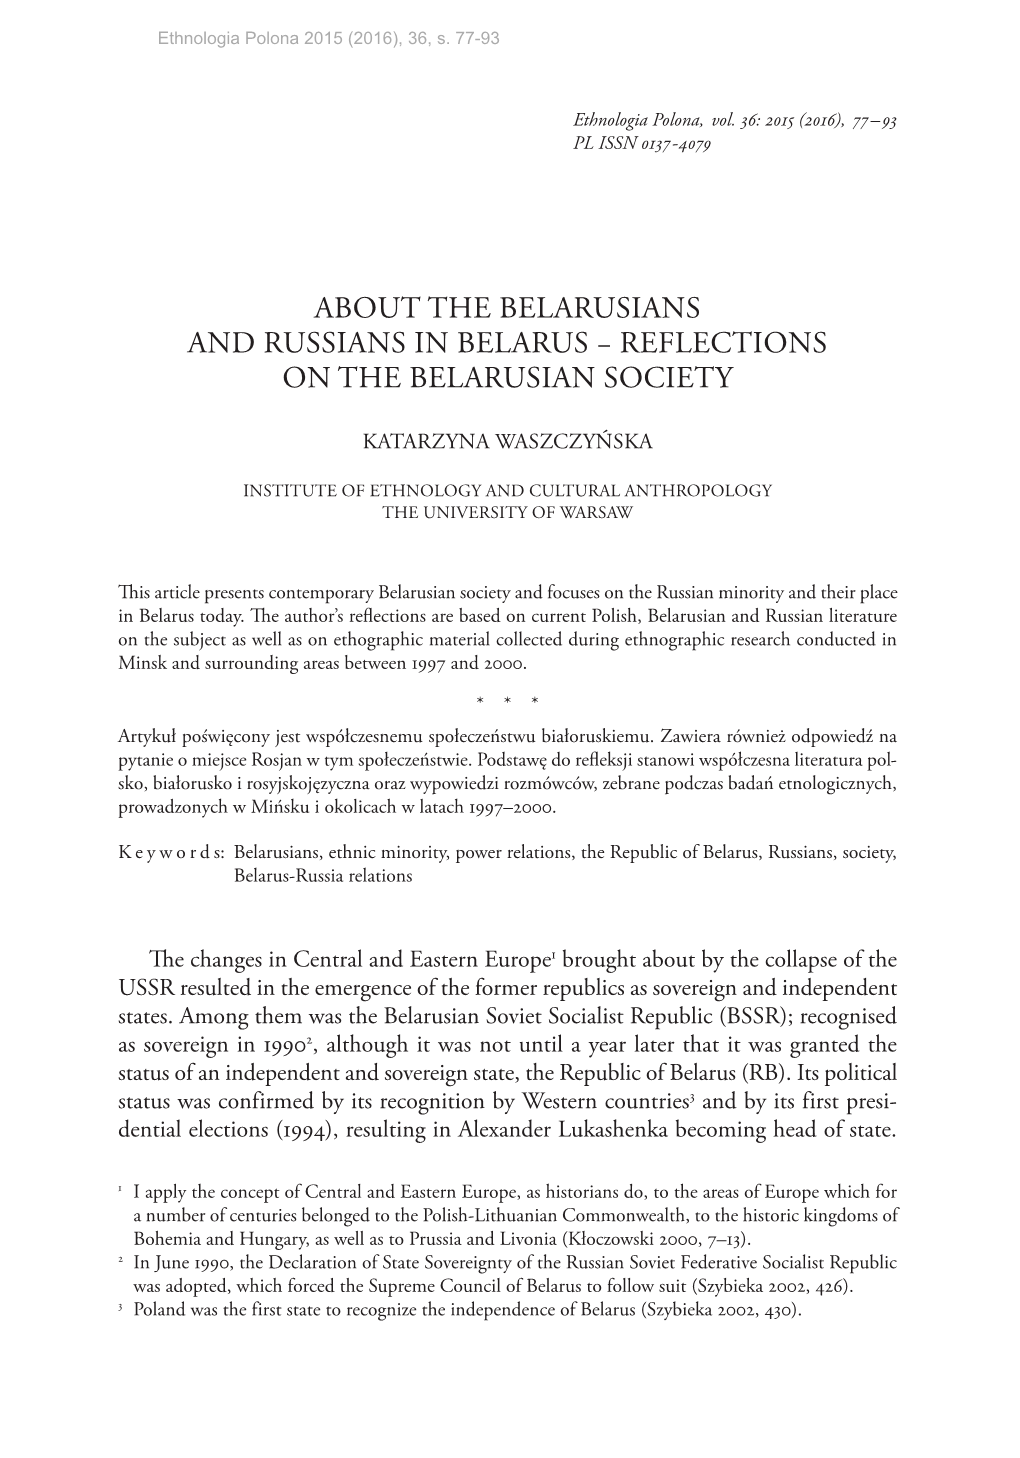 About the Belarusians and Russians in Belarus − Reflections on the Belarusian Society